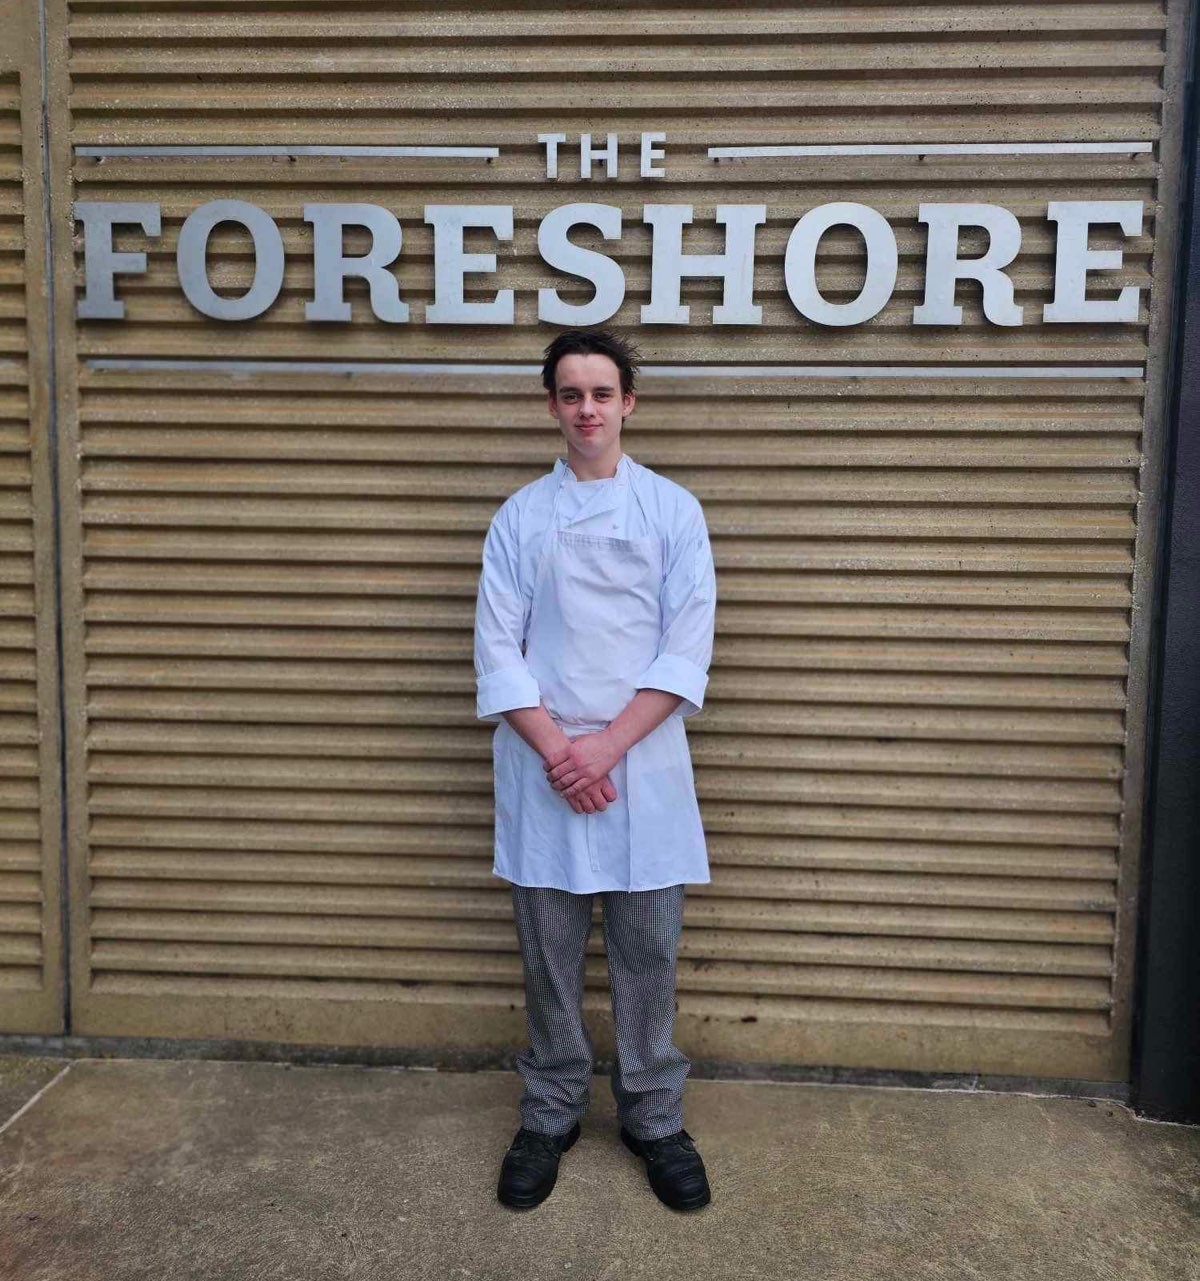 Cookery student in chef clothing standing in front of the Foreshore Hotel building